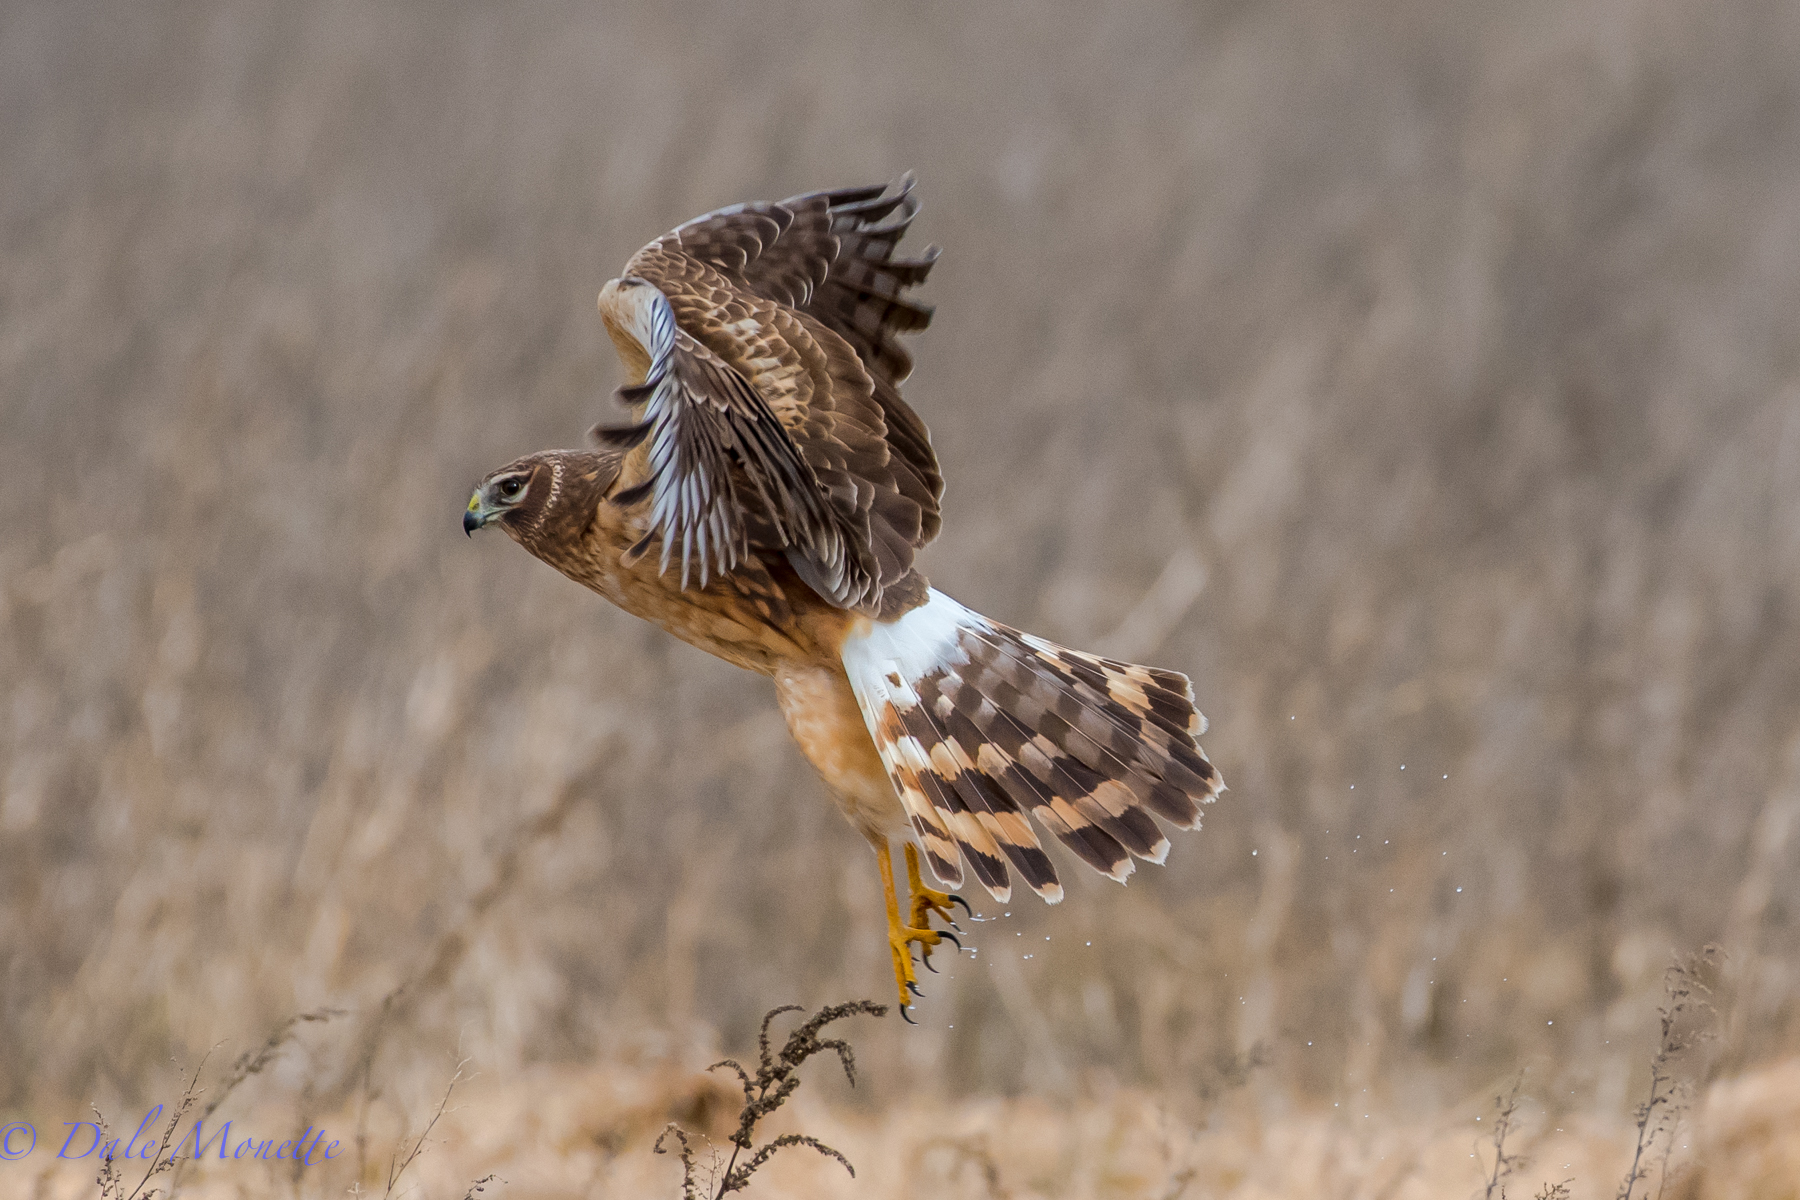   I cant get enough of these beautiful hawks. &nbsp;A female northern harrier at Arcadia today lifts off from a small wet area she was sitting in. &nbsp;She landed 35 yards away and stayed there for a few seconds while I had her in my sights focused 